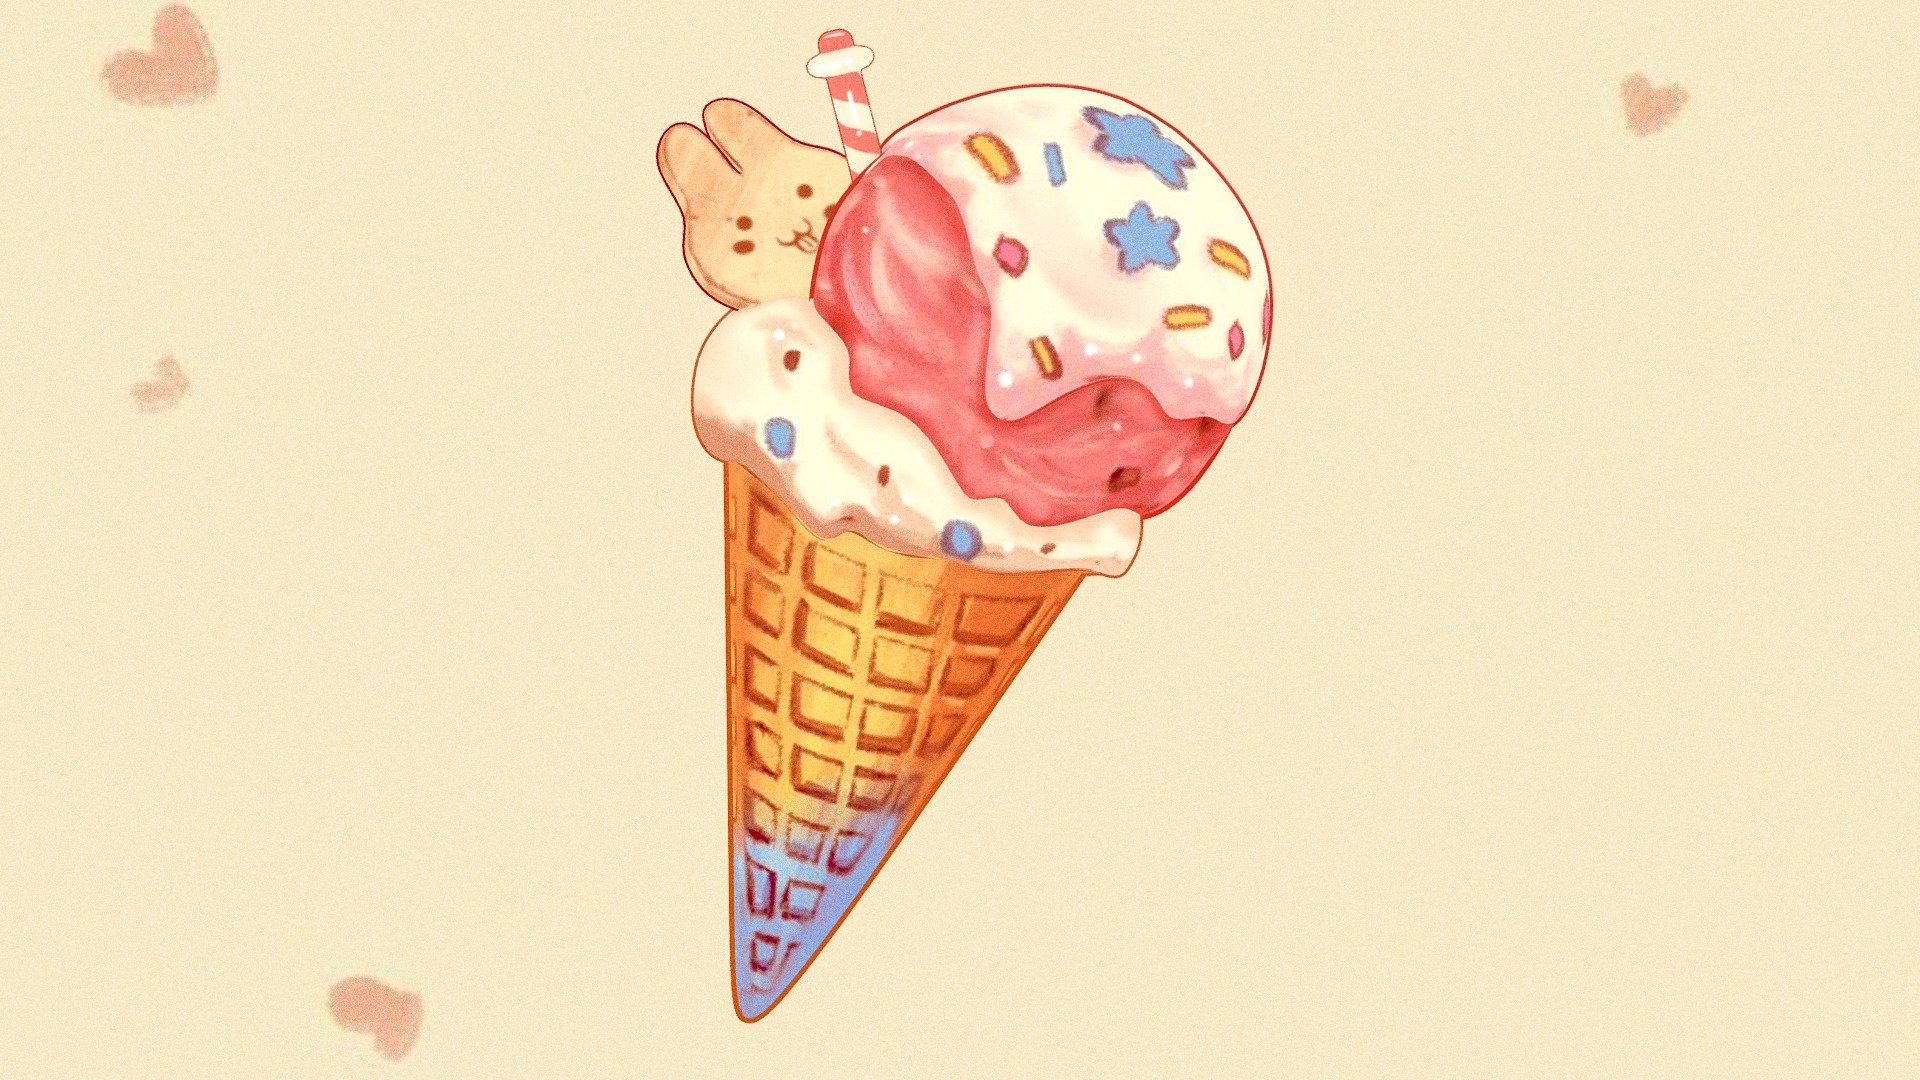 hello everyone i made some
FanArt ice cream form yossy artwork 
https://www.instagram.com/p/B8nGvvKF_Kb/
hope you guys like it :D

anyway its free download ;) - ICE CREAM - Download Free 3D model by Adipriatna 3d model